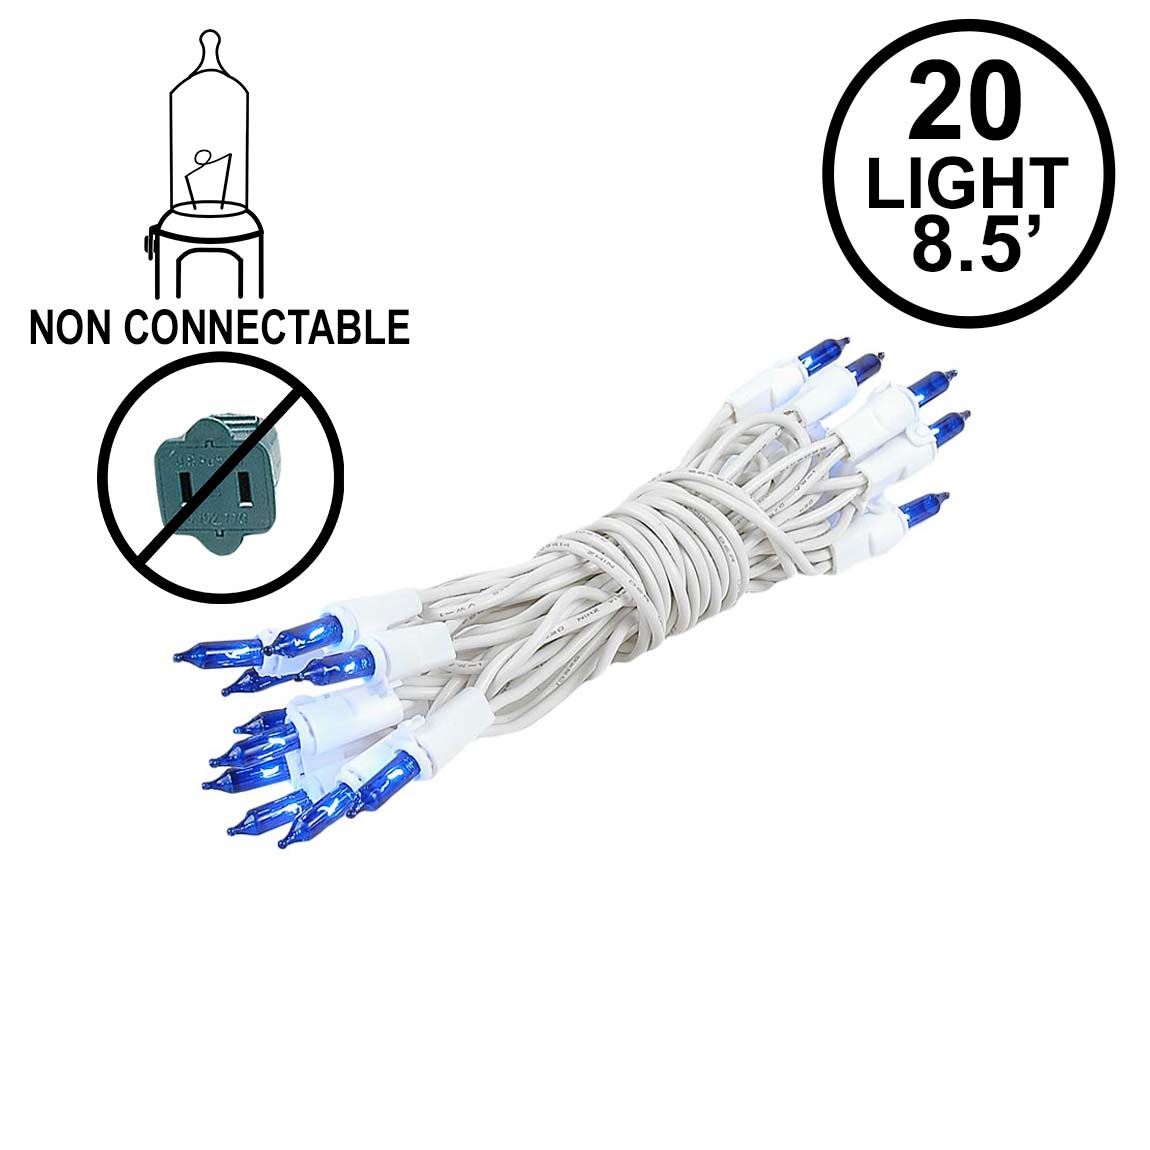 Picture of Non Connectable Blue White Wire Mini Lights 20 Light 8.5'